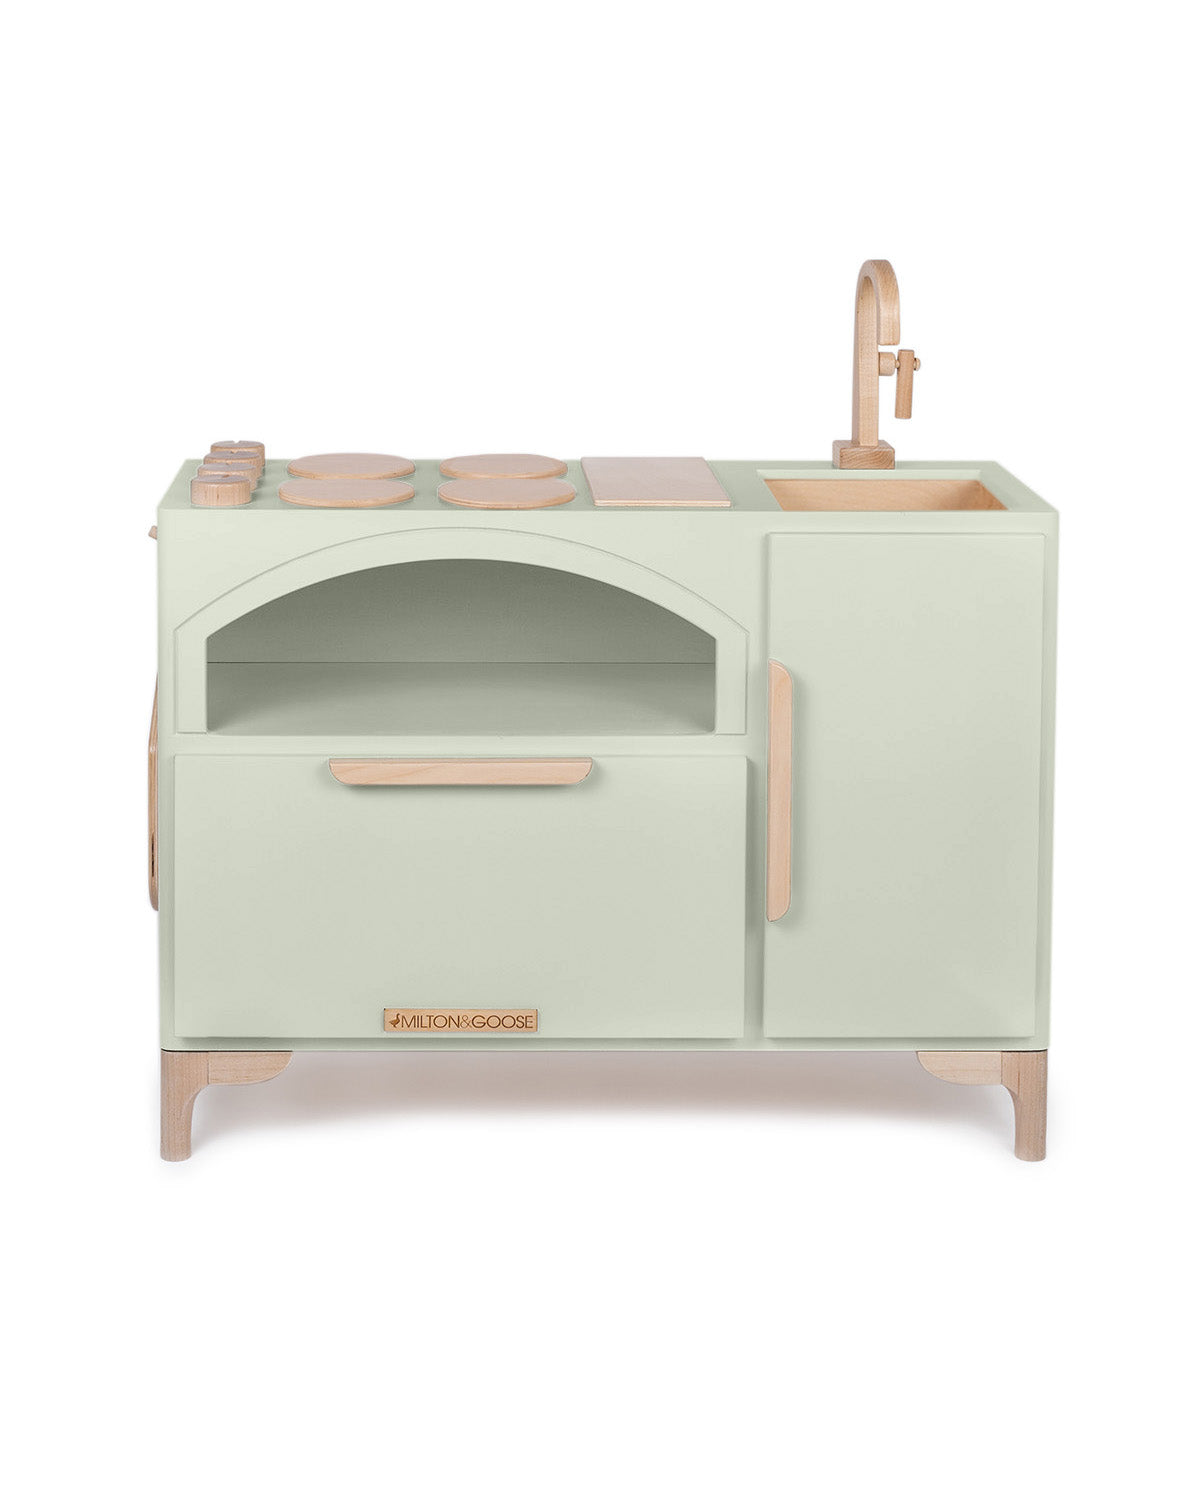 Milton & Goose's Luca Play Kitchen in light sage, a green/gray color. Featuring a pizza oven and coordinating pizza paddle.